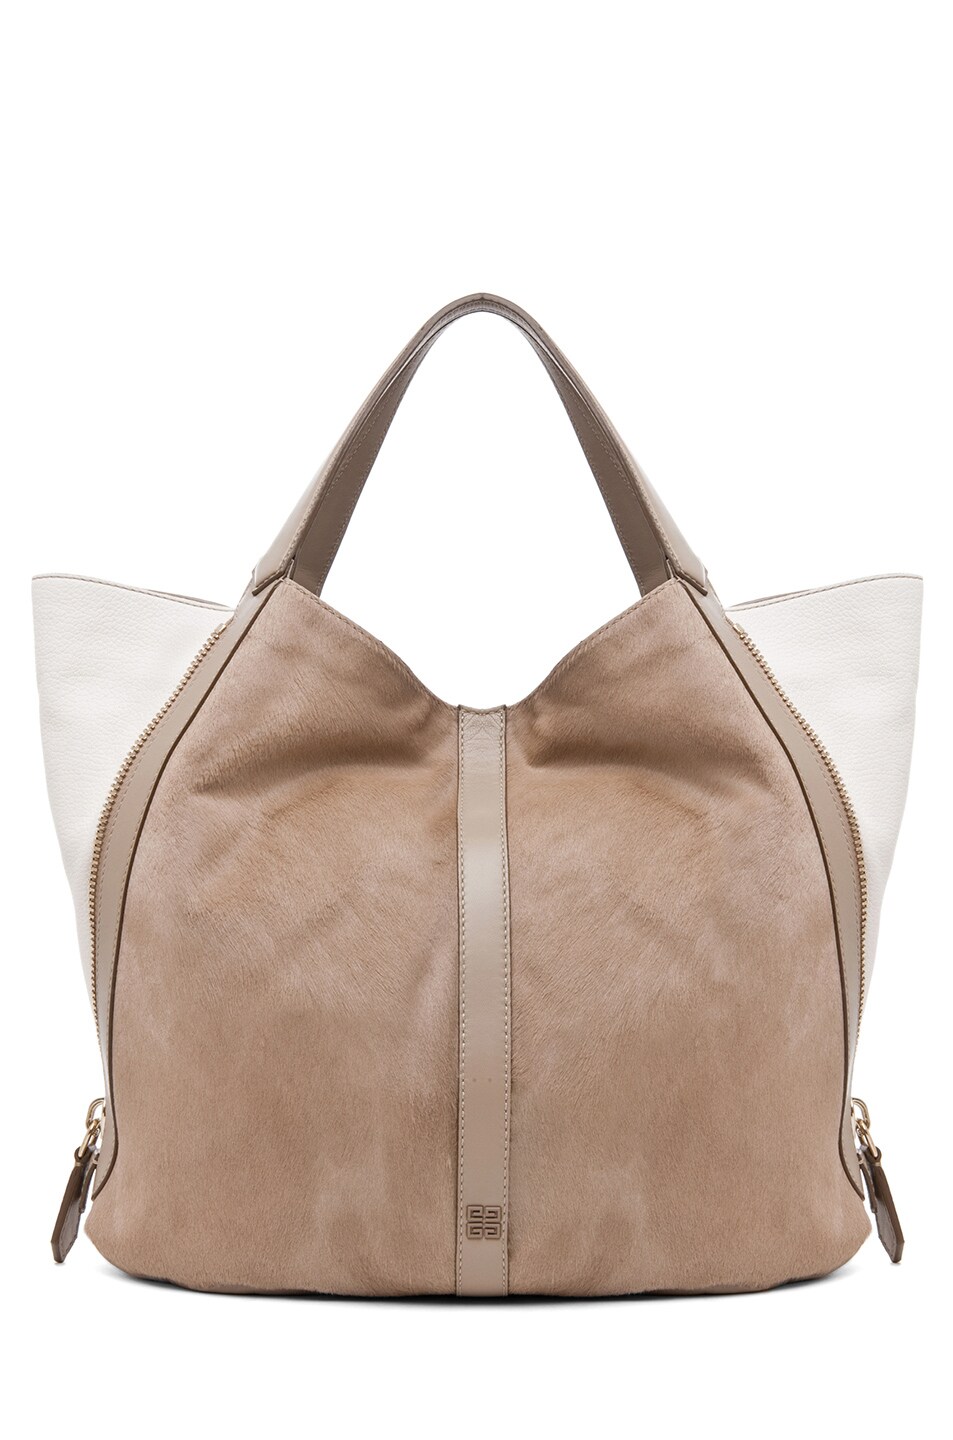 Givenchy Large Tinhan Pony Front Shopper in Mastic White | FWRD